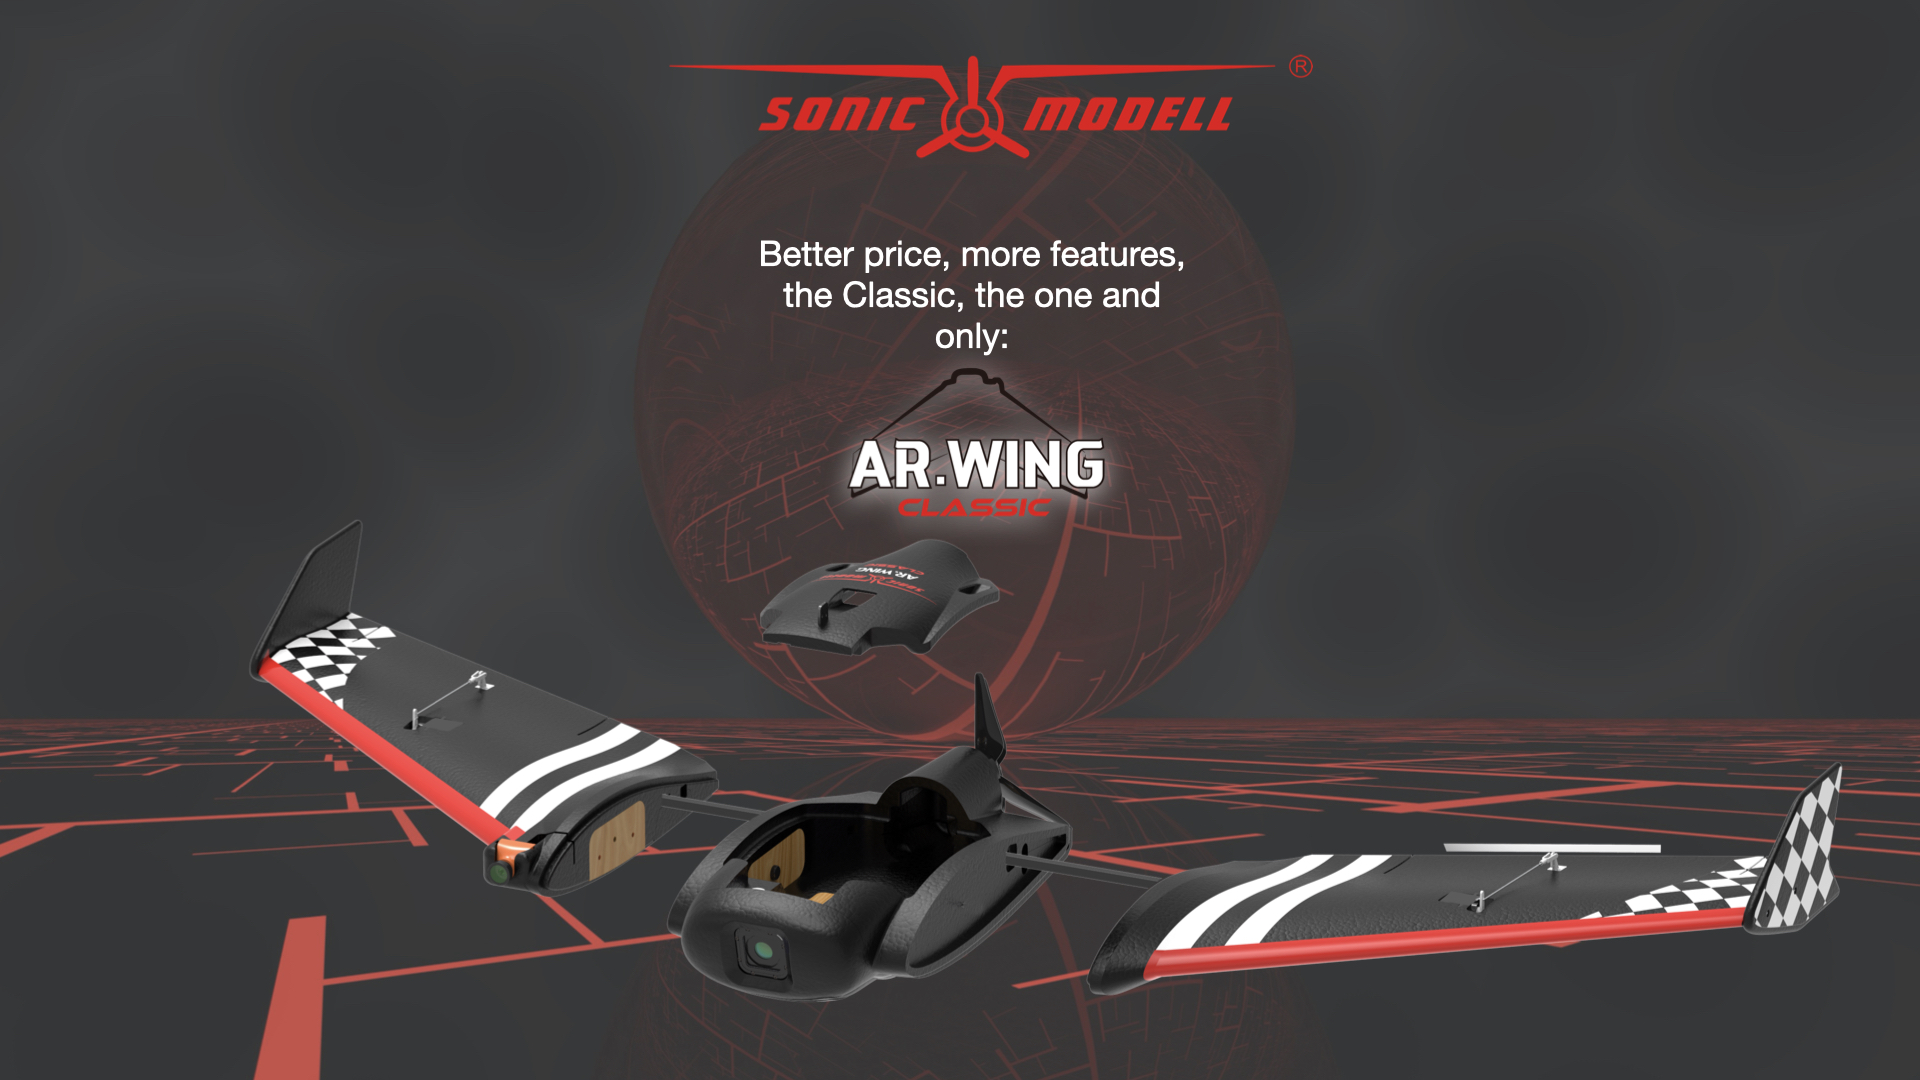 Limited-Supply-Sonicmodell-AR-WING-CLASSIC-900mm-Wingspan-EPP-FPV-Flying-Wing-RC-Airplane-KITPNP-1789234-11